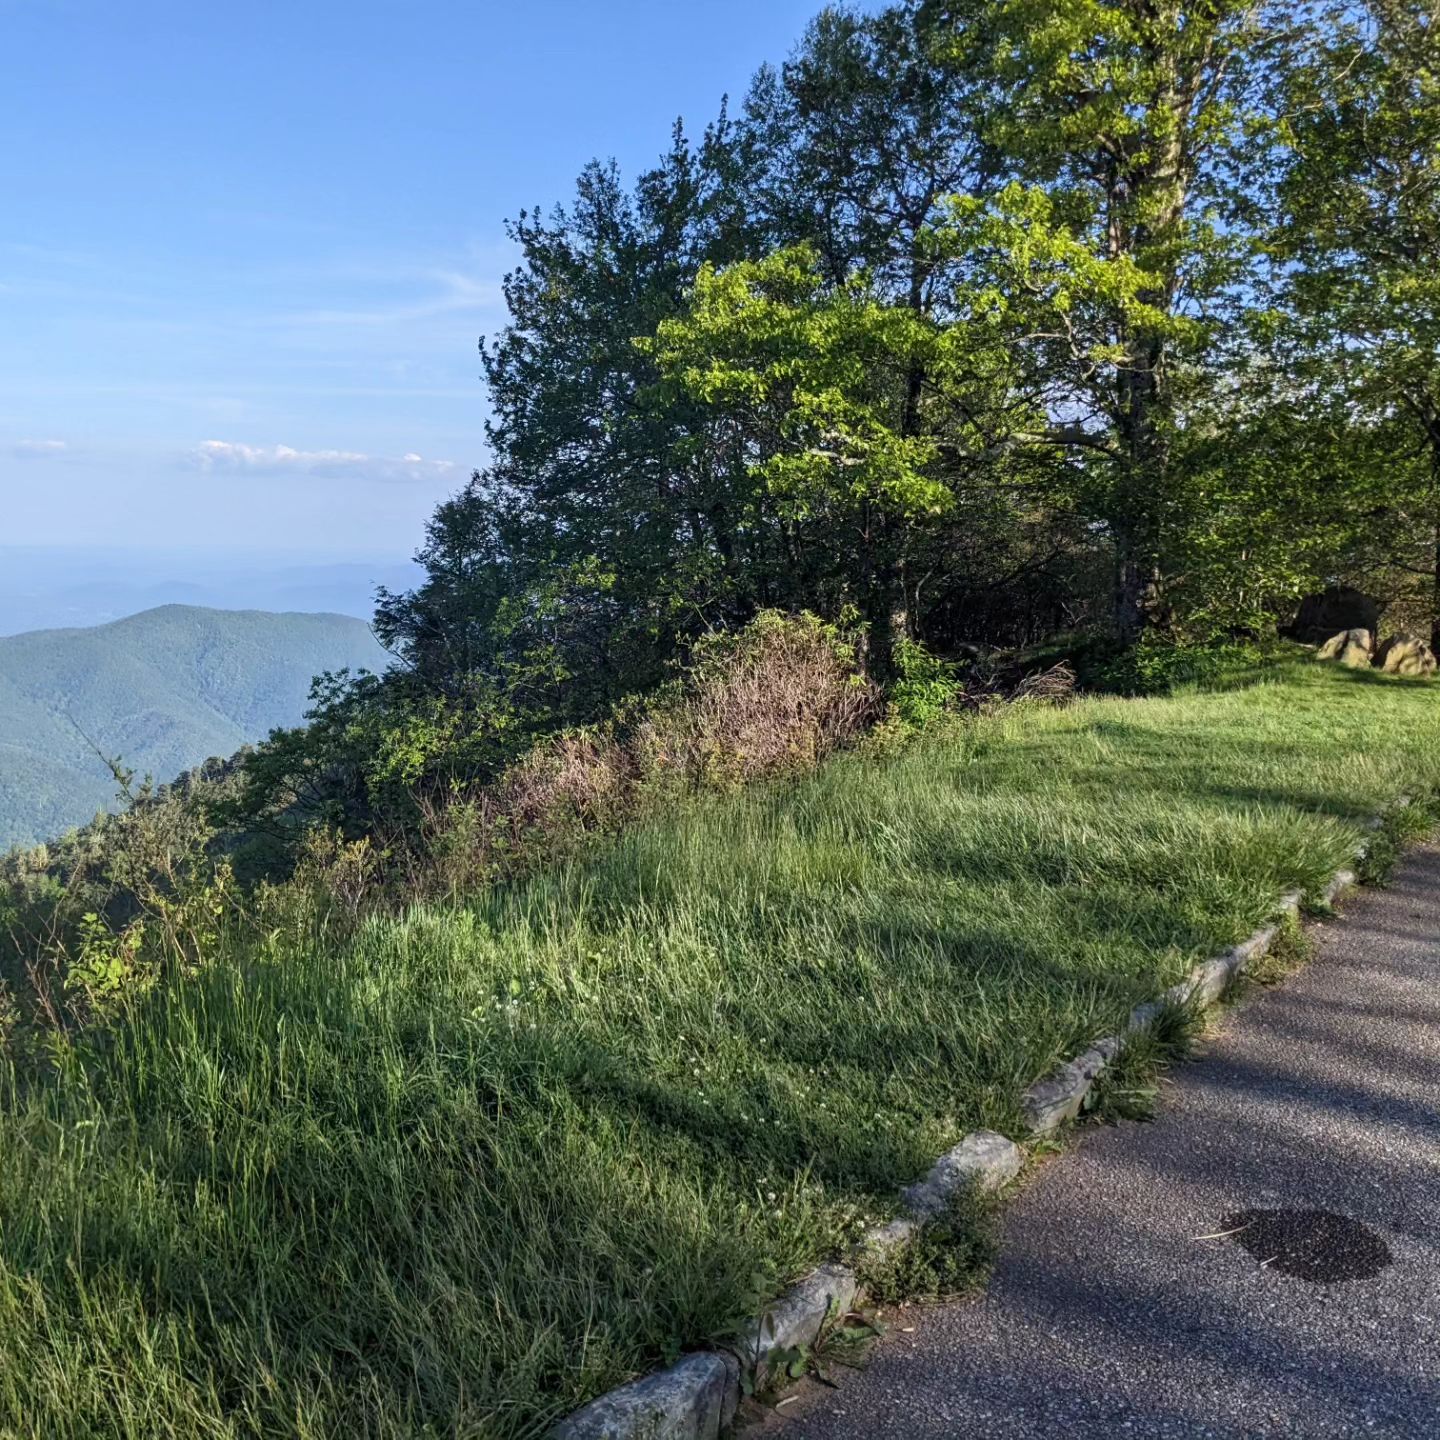 A semi random smash of pictures from today. I had 400 miles to do at ~45mph so there wasn't a huge amount of time to stop... #blueridgeparkway #motorrad #bucketlist #bucketlistadventures